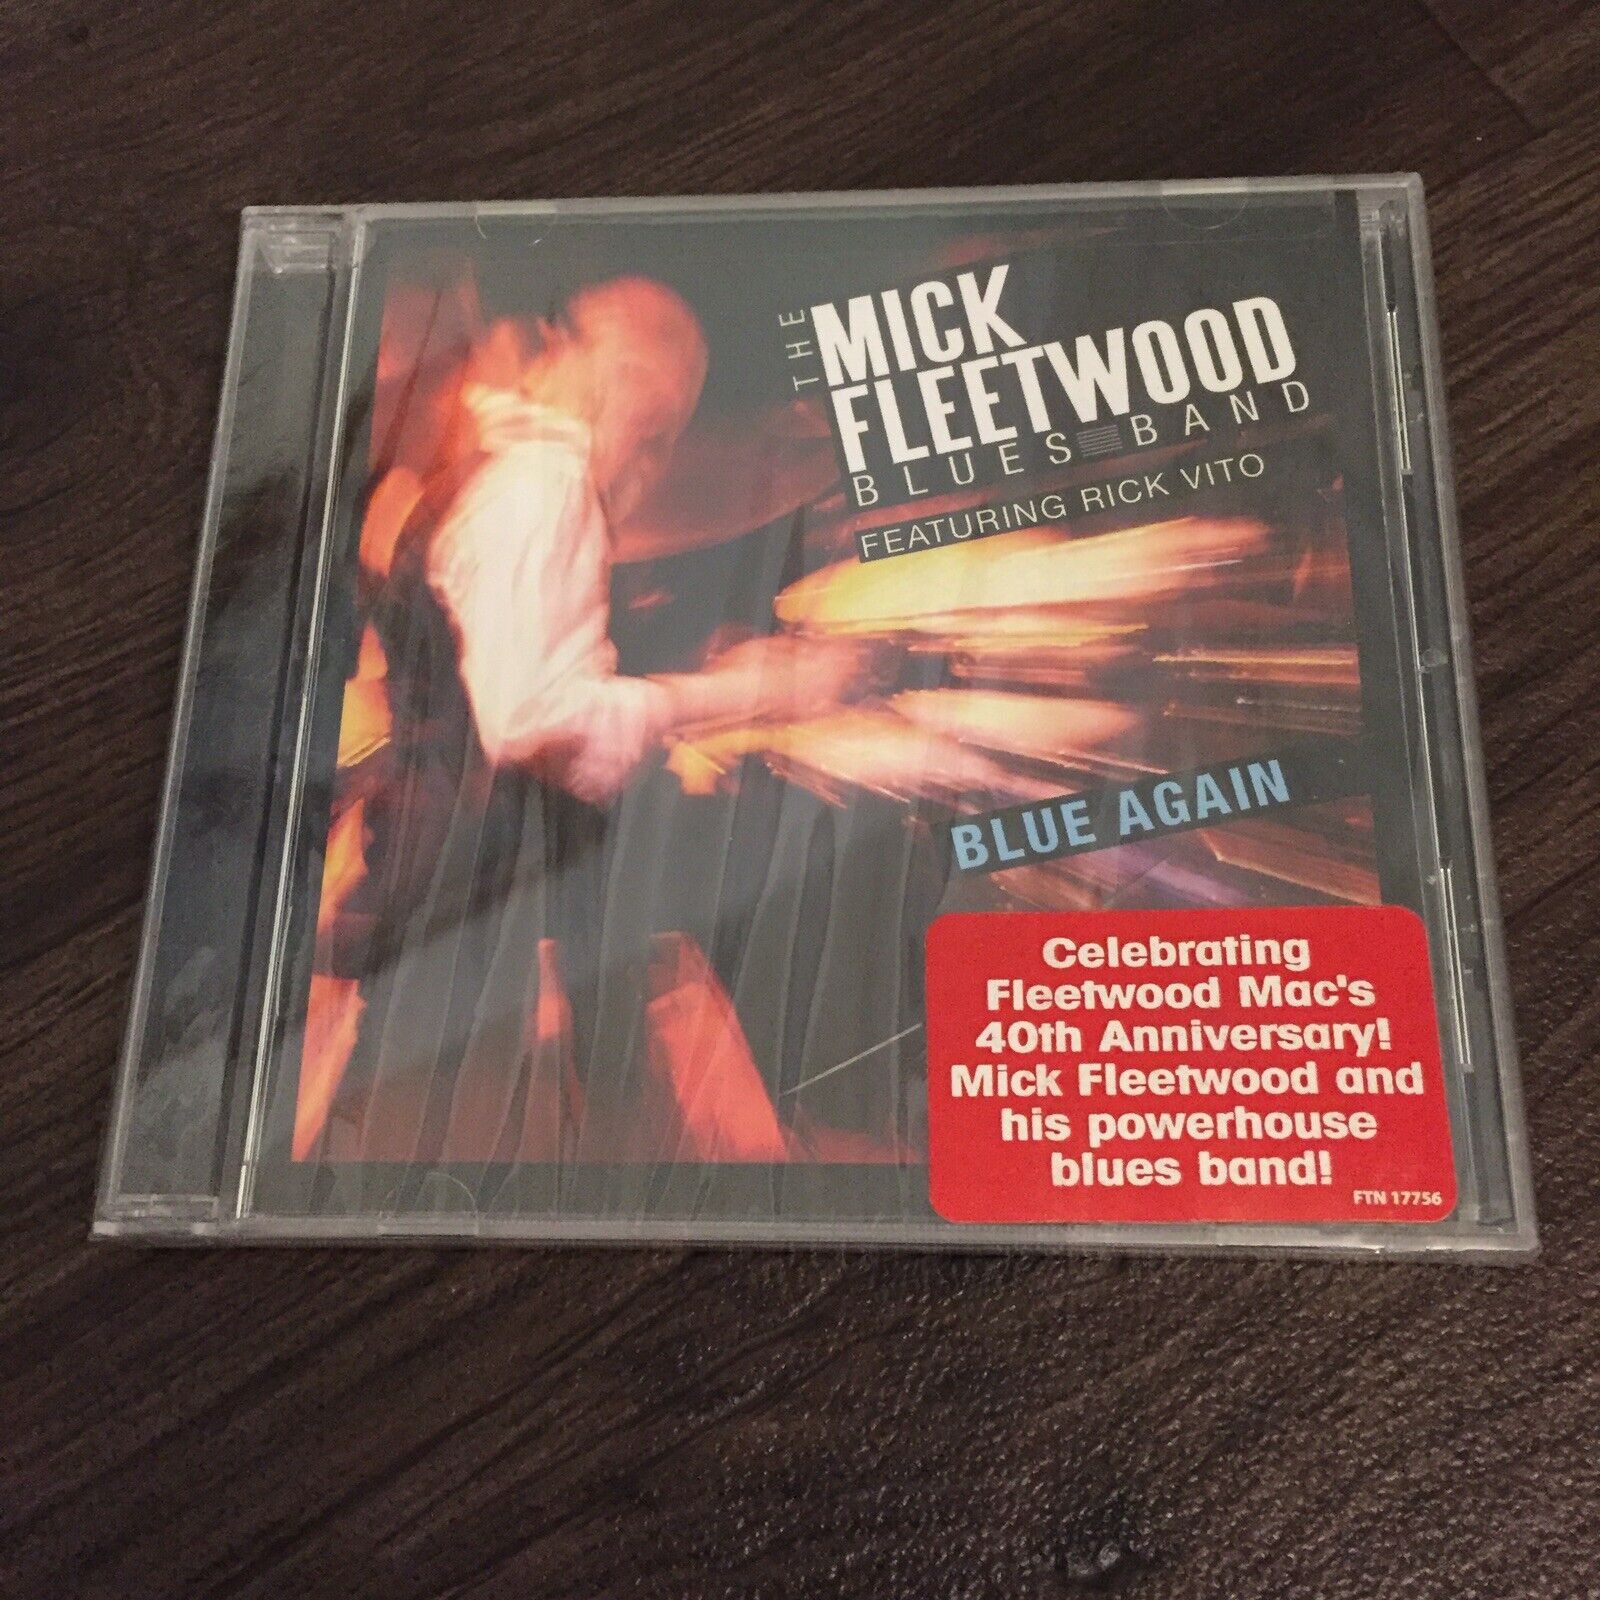 Blue Again by Mick Fleetwood Featuring Rick Vito (CD, 2009) New Sealed